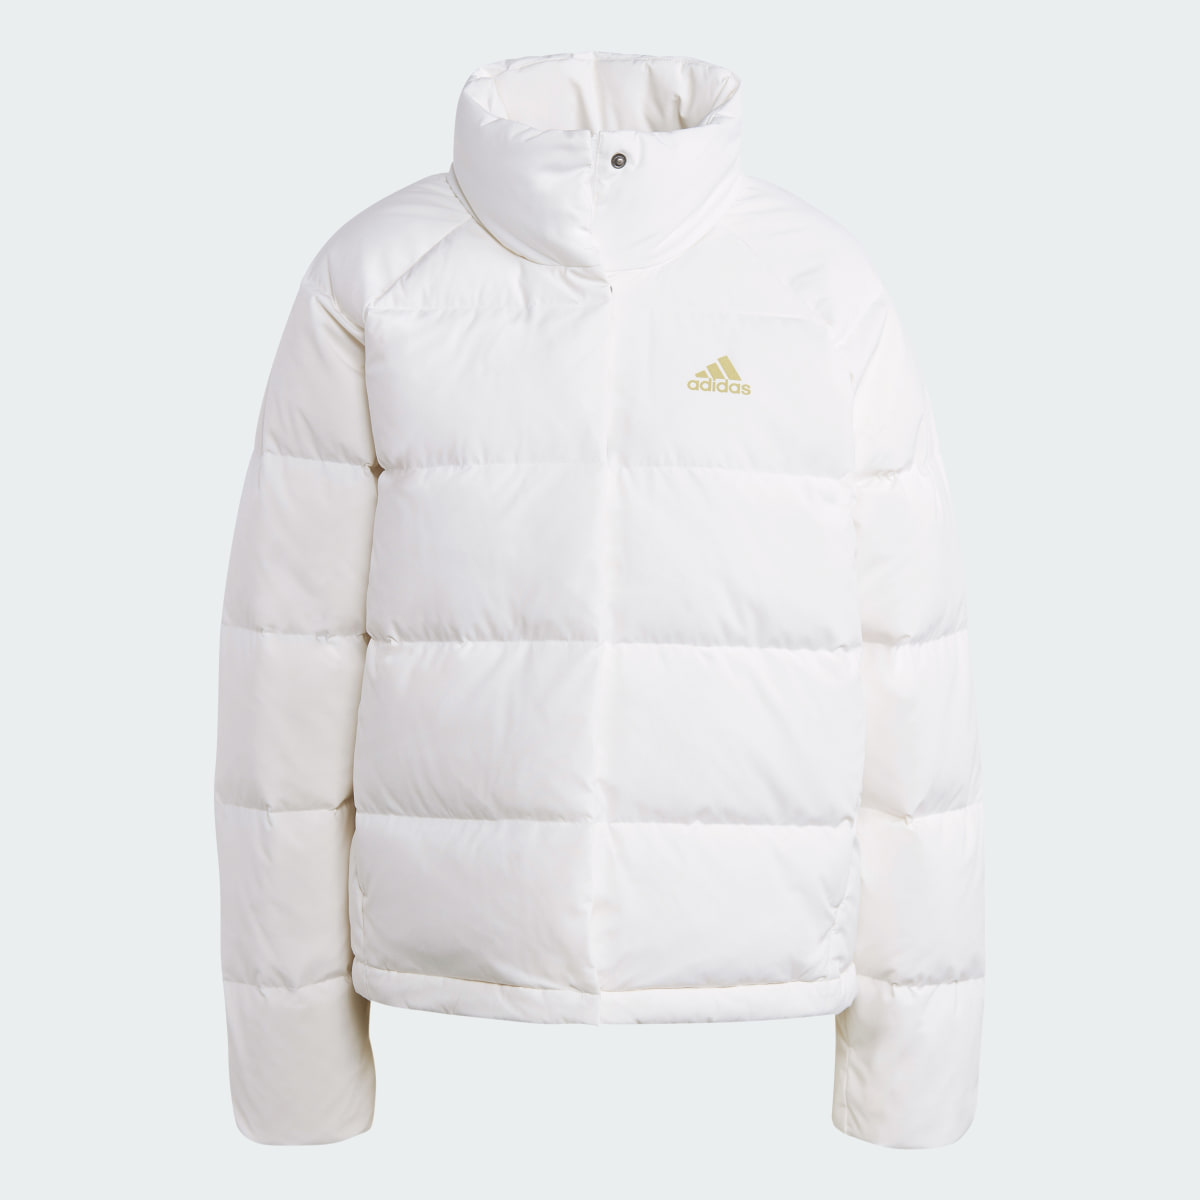 Adidas Helionic Relaxed Down Jacket. 5